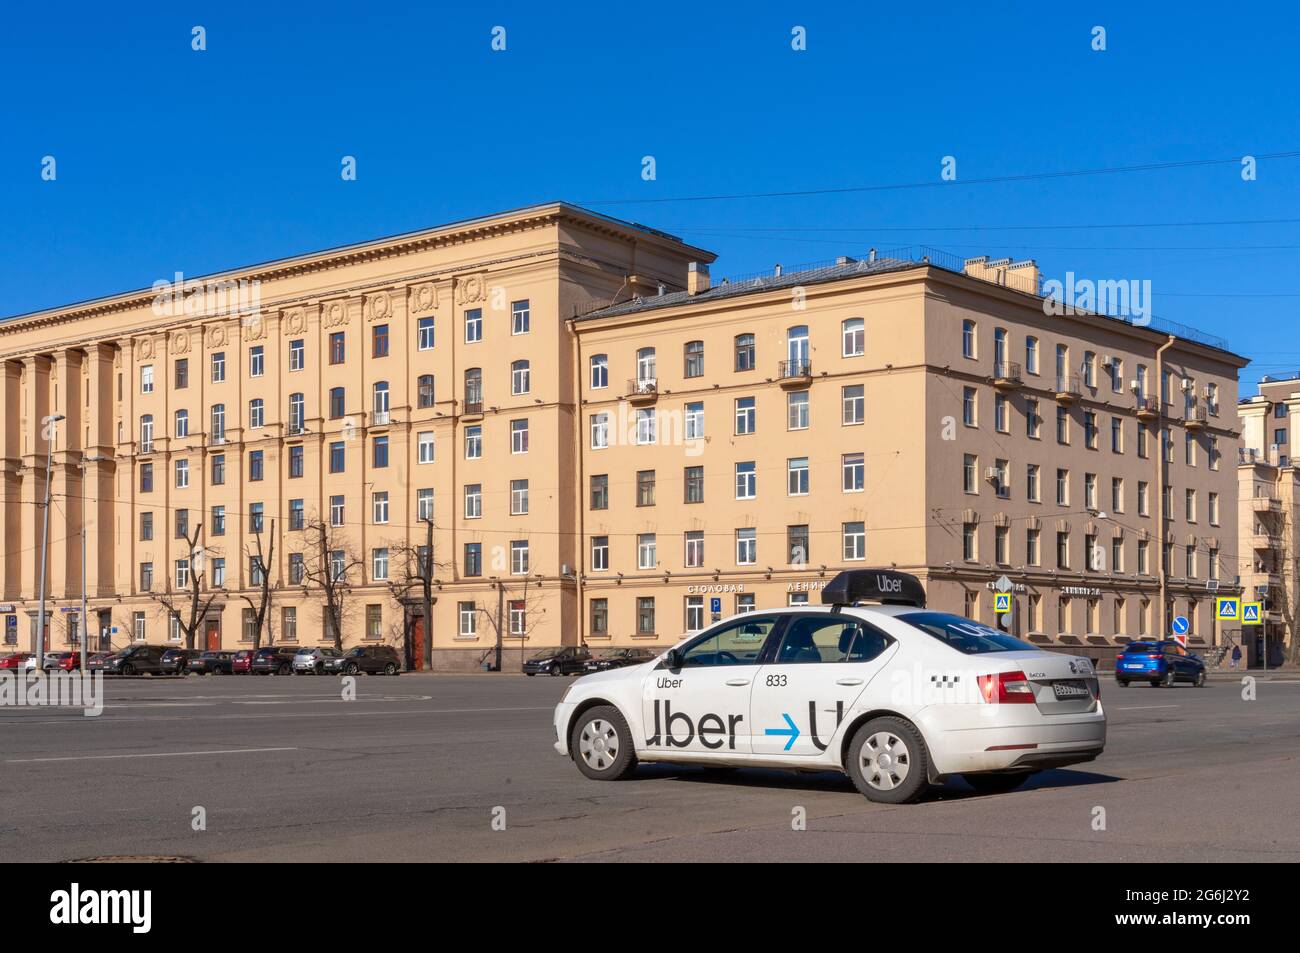 Empty Uber taxi car on square outside stalinist ampire historical building, St Petersburg, Russia Stock Photo